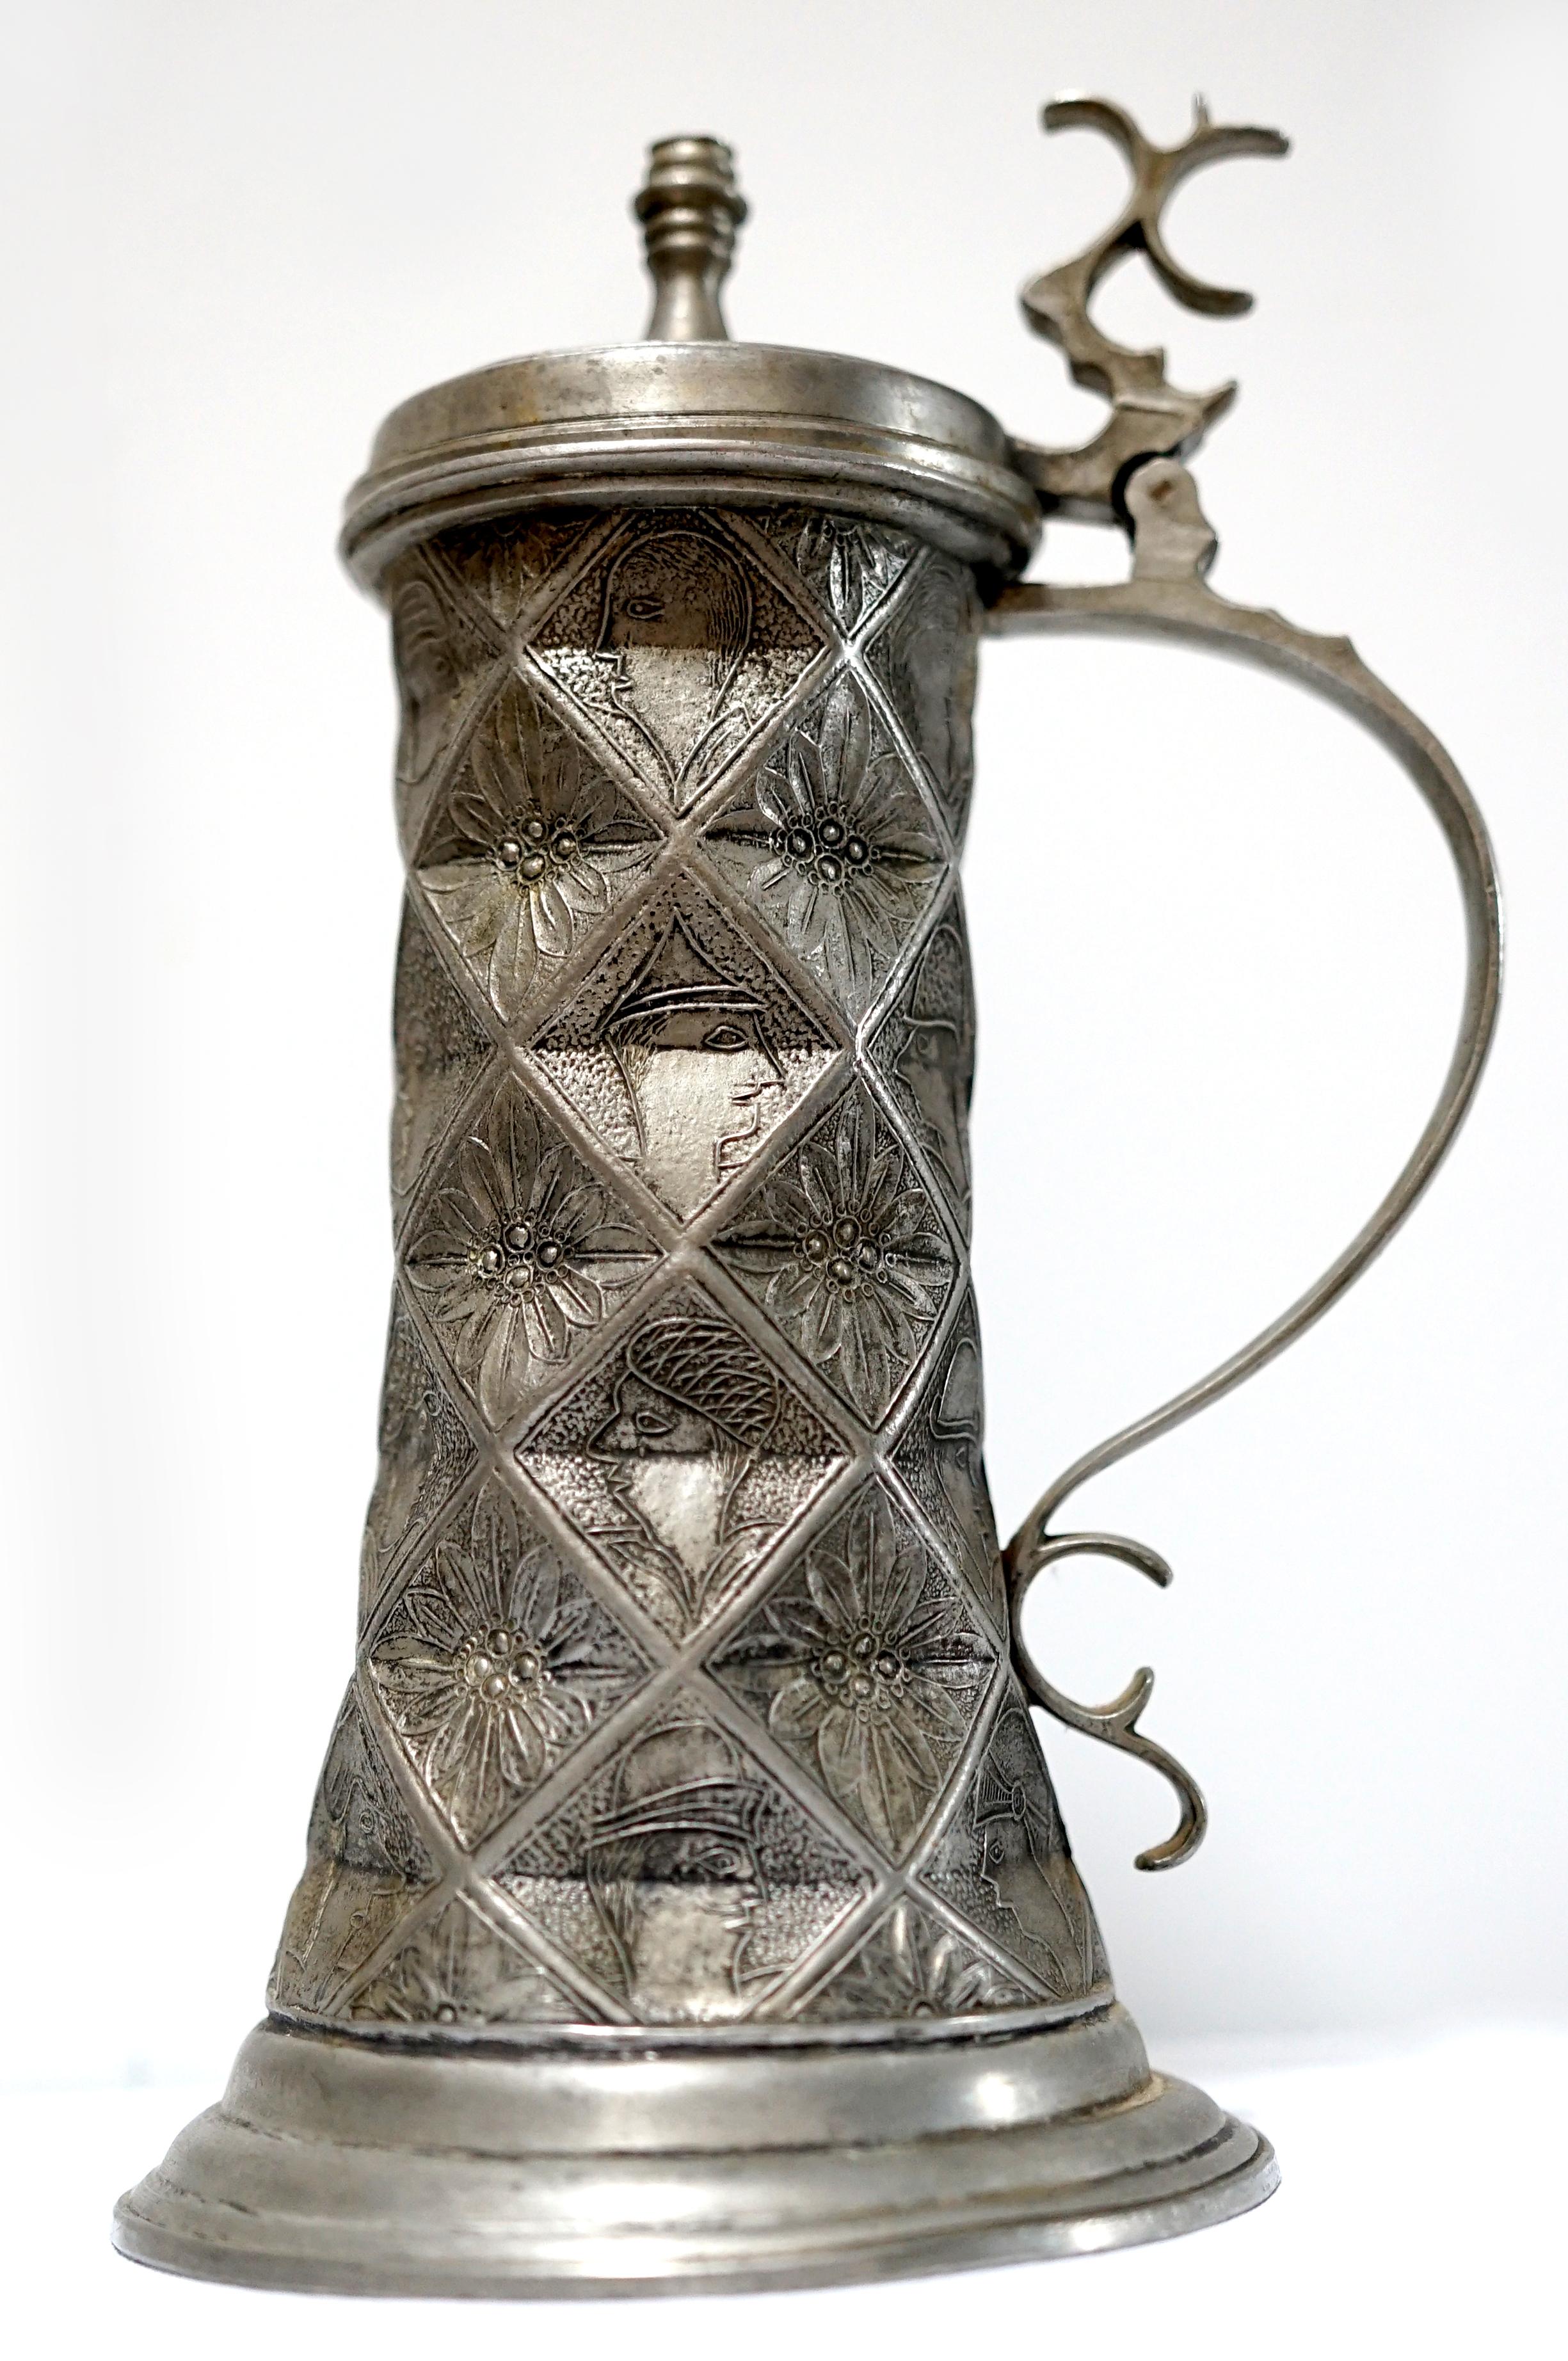 The Fein Zinn and Kayserzinn set is handcrafted pewter. The vintage Fein Zinn pewter tankard and cup is probably late 19th Century. 
Of circular section with shouldered cover, shaped handle and thumbmold, flaring body with geometric 